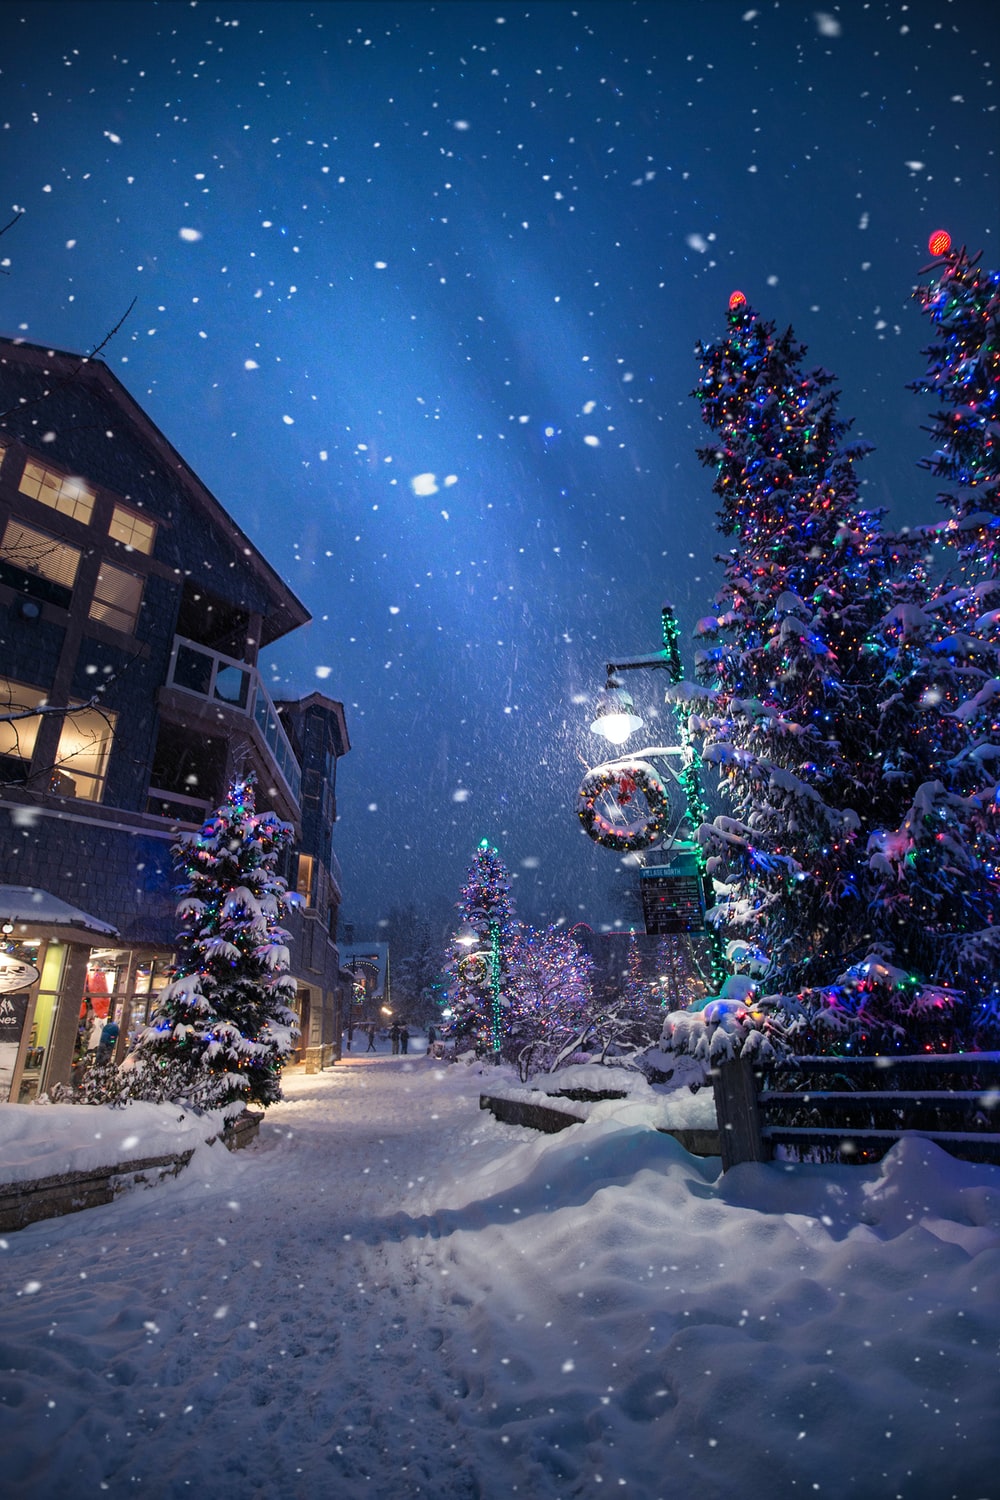 Christmas Snow Picture. Download Free Image